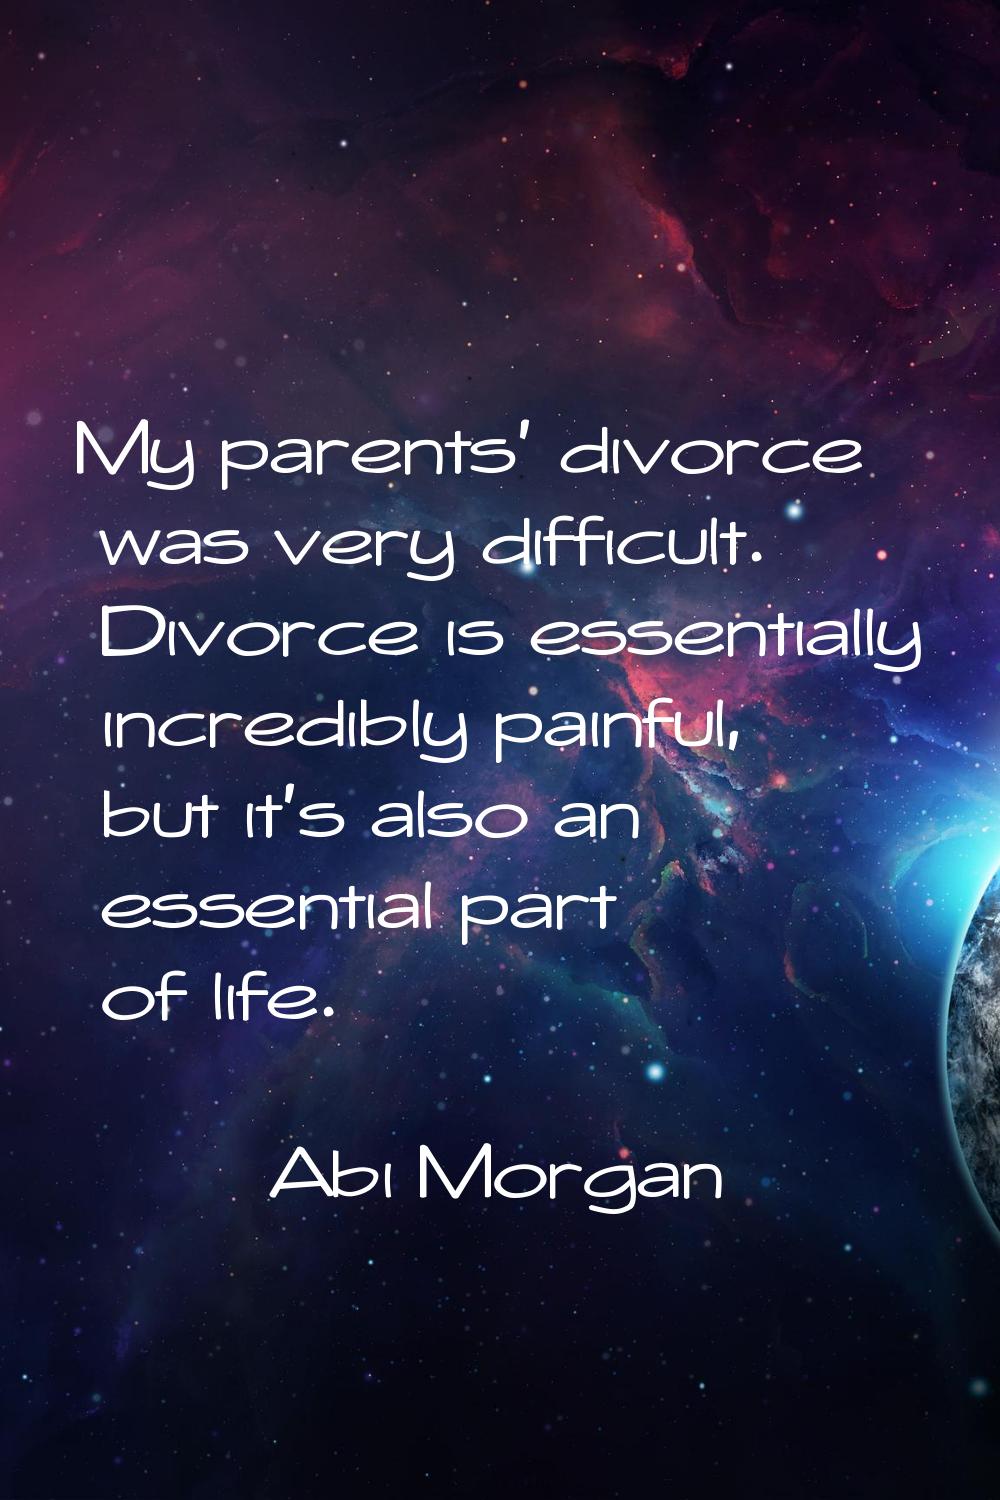 My parents' divorce was very difficult. Divorce is essentially incredibly painful, but it's also an